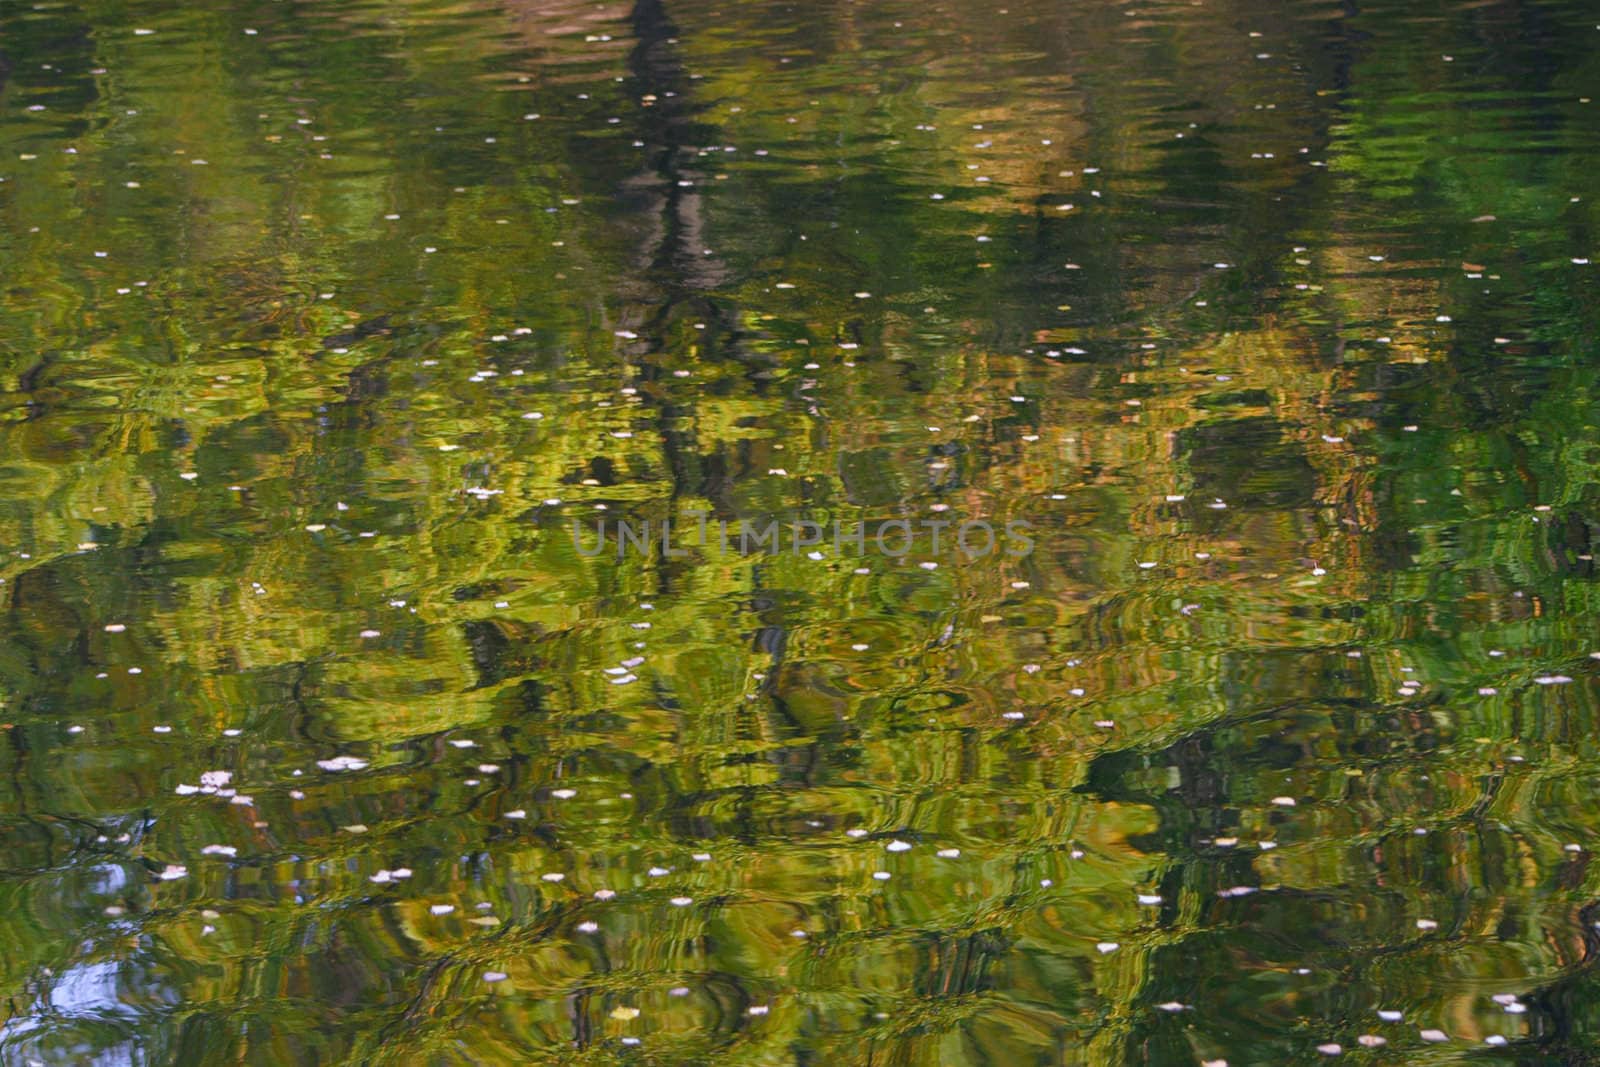 Reflexion of autumn in water going waves removed close up